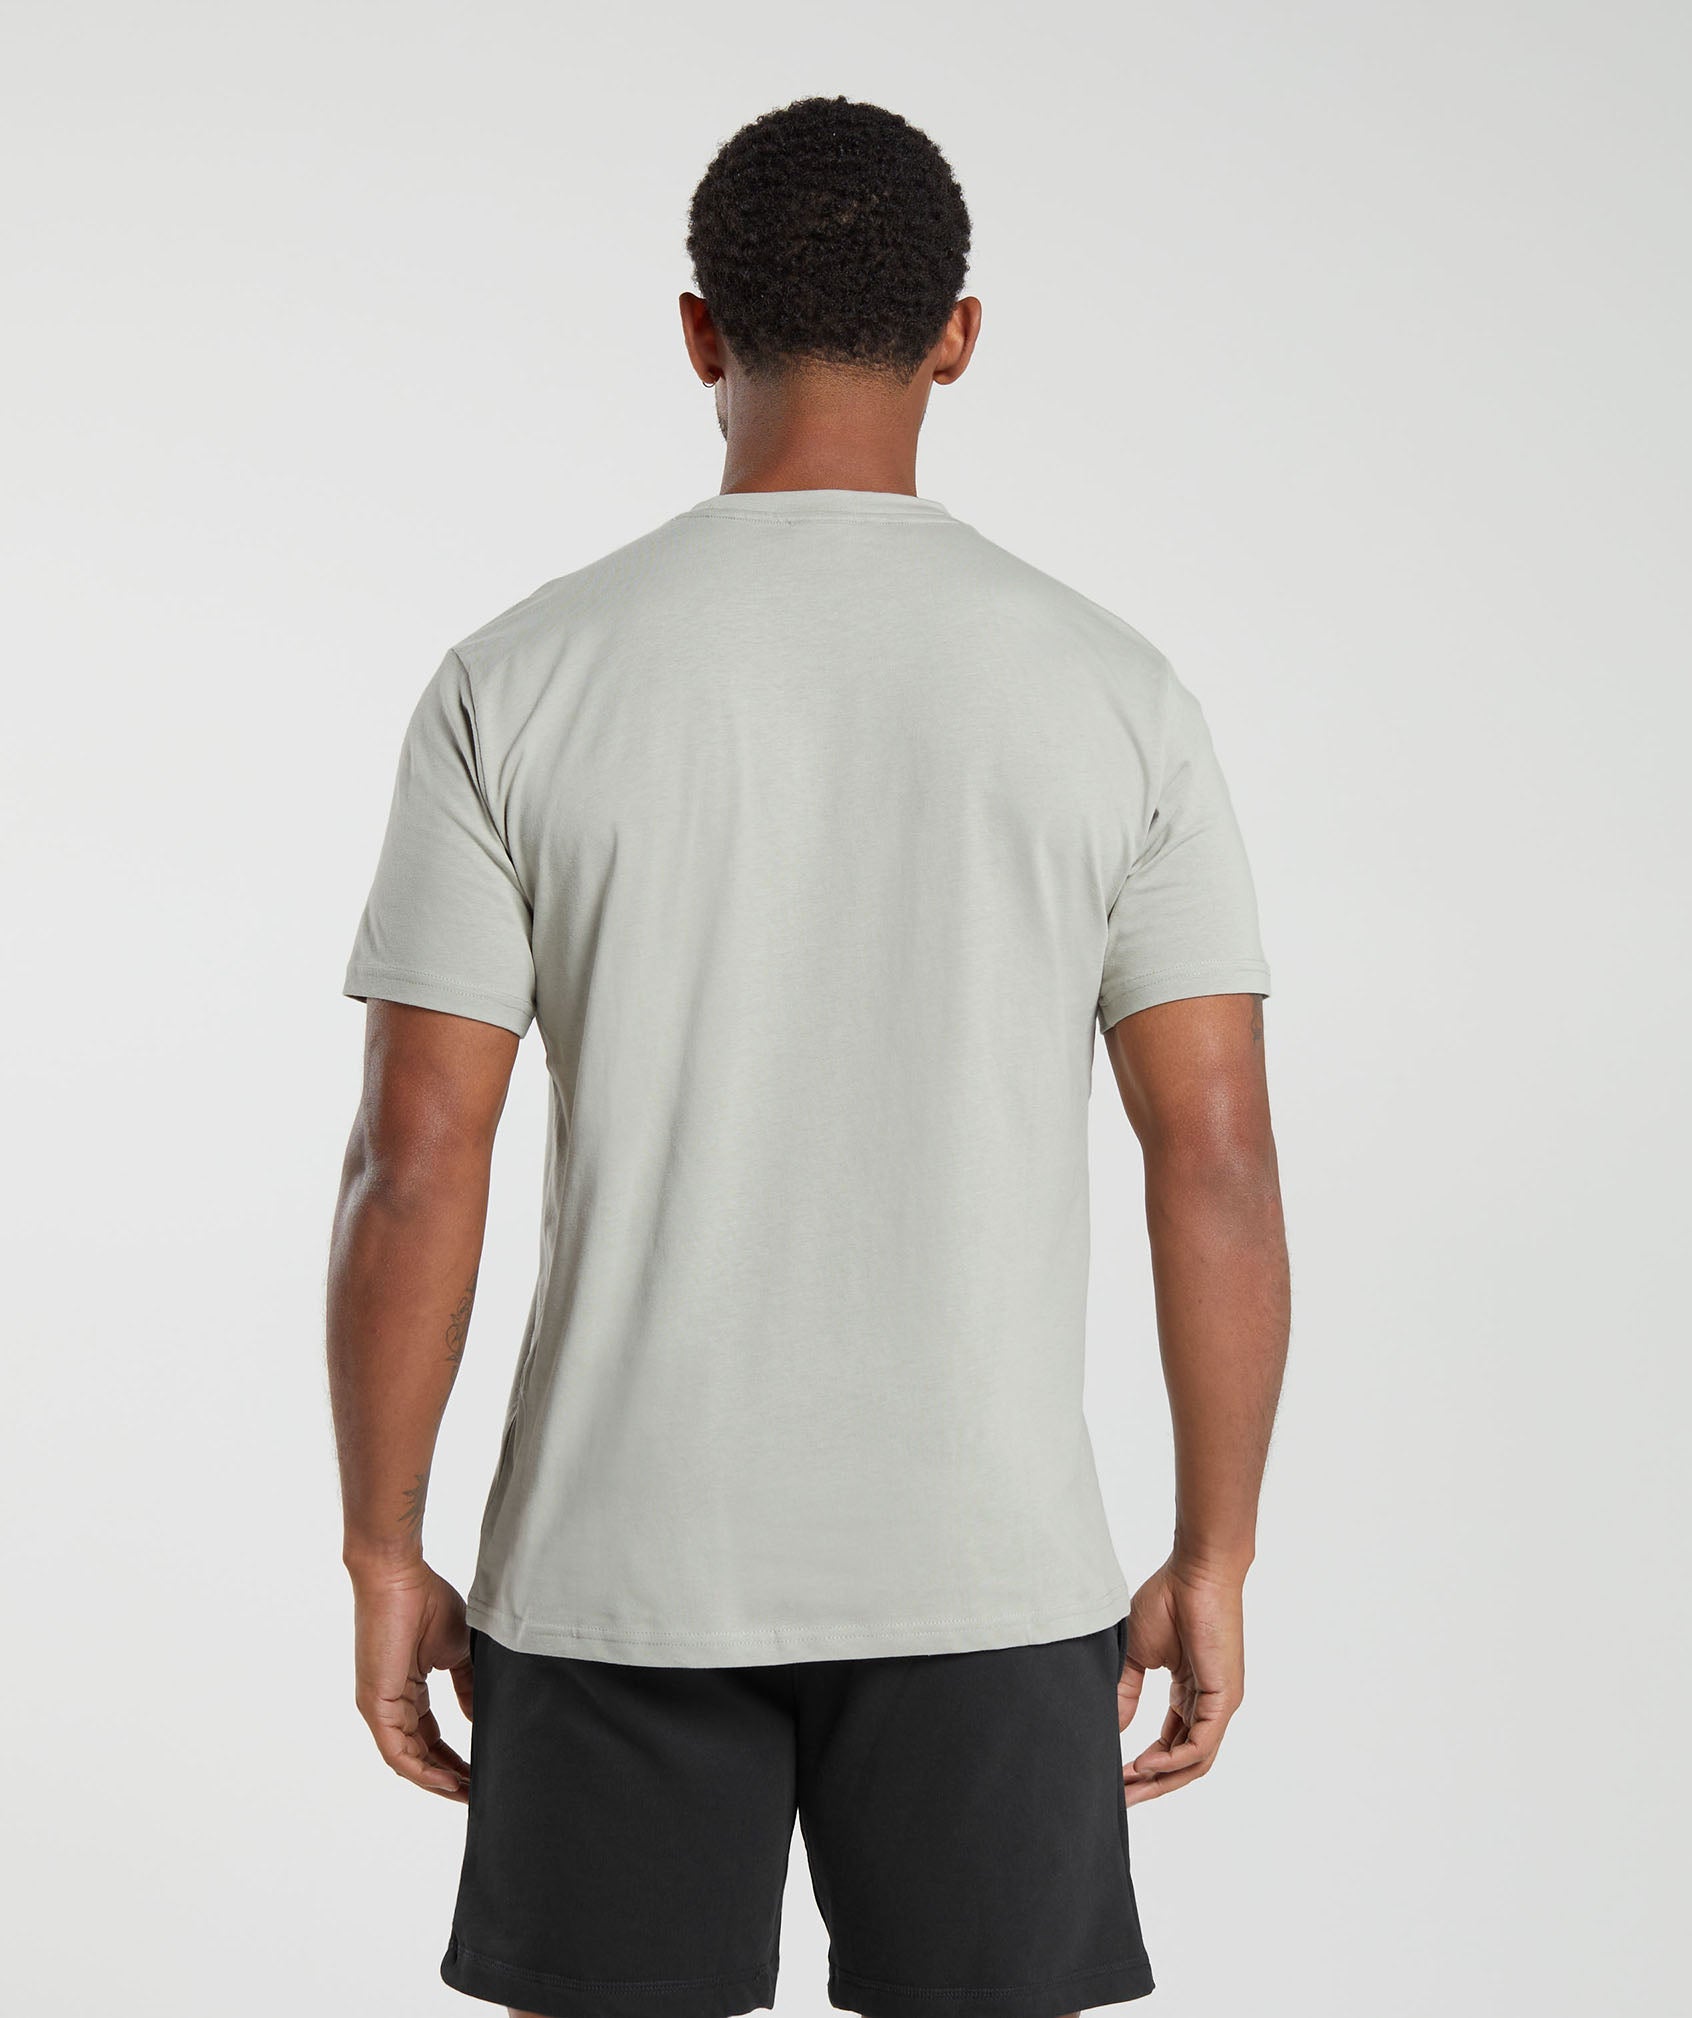 Crest T-Shirt in Stone Grey - view 2